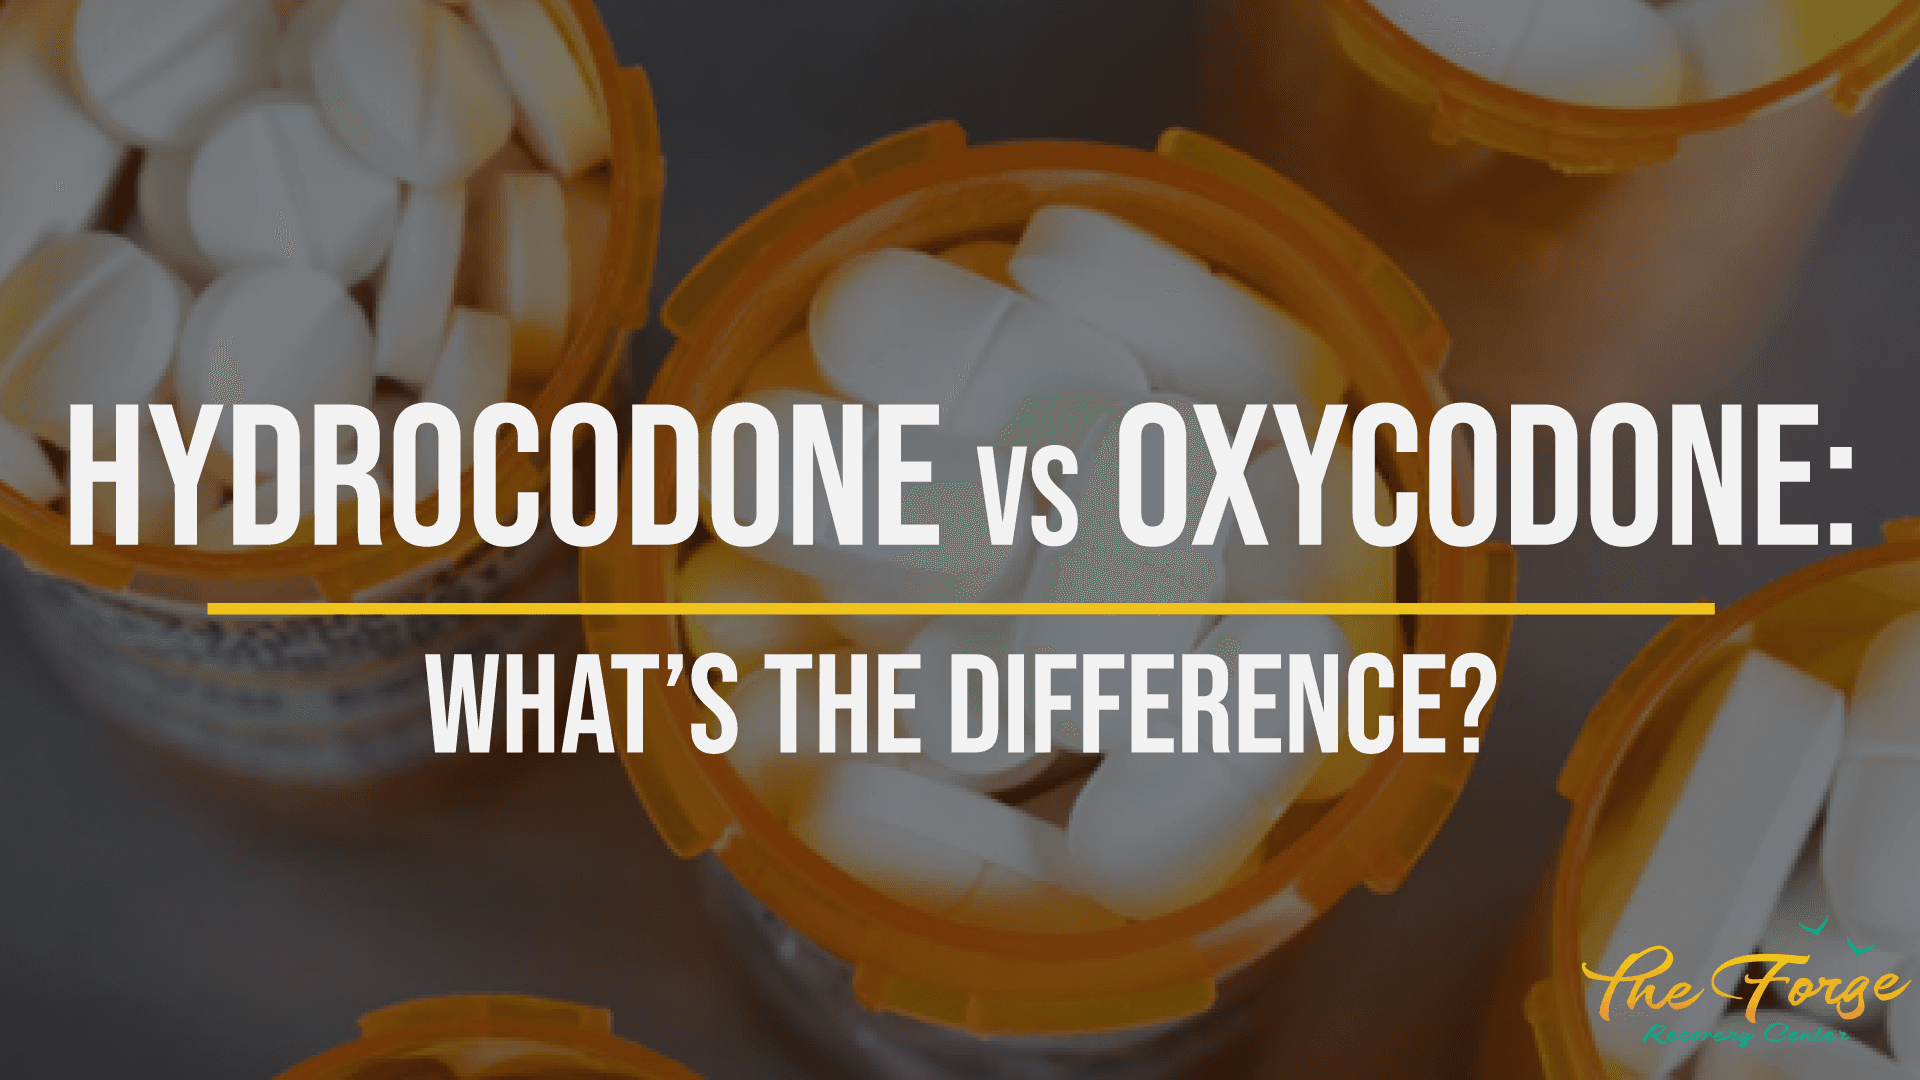 Hydrocodone vs. Oxycodone: Facts & Differences Between These Synthetic Opioids